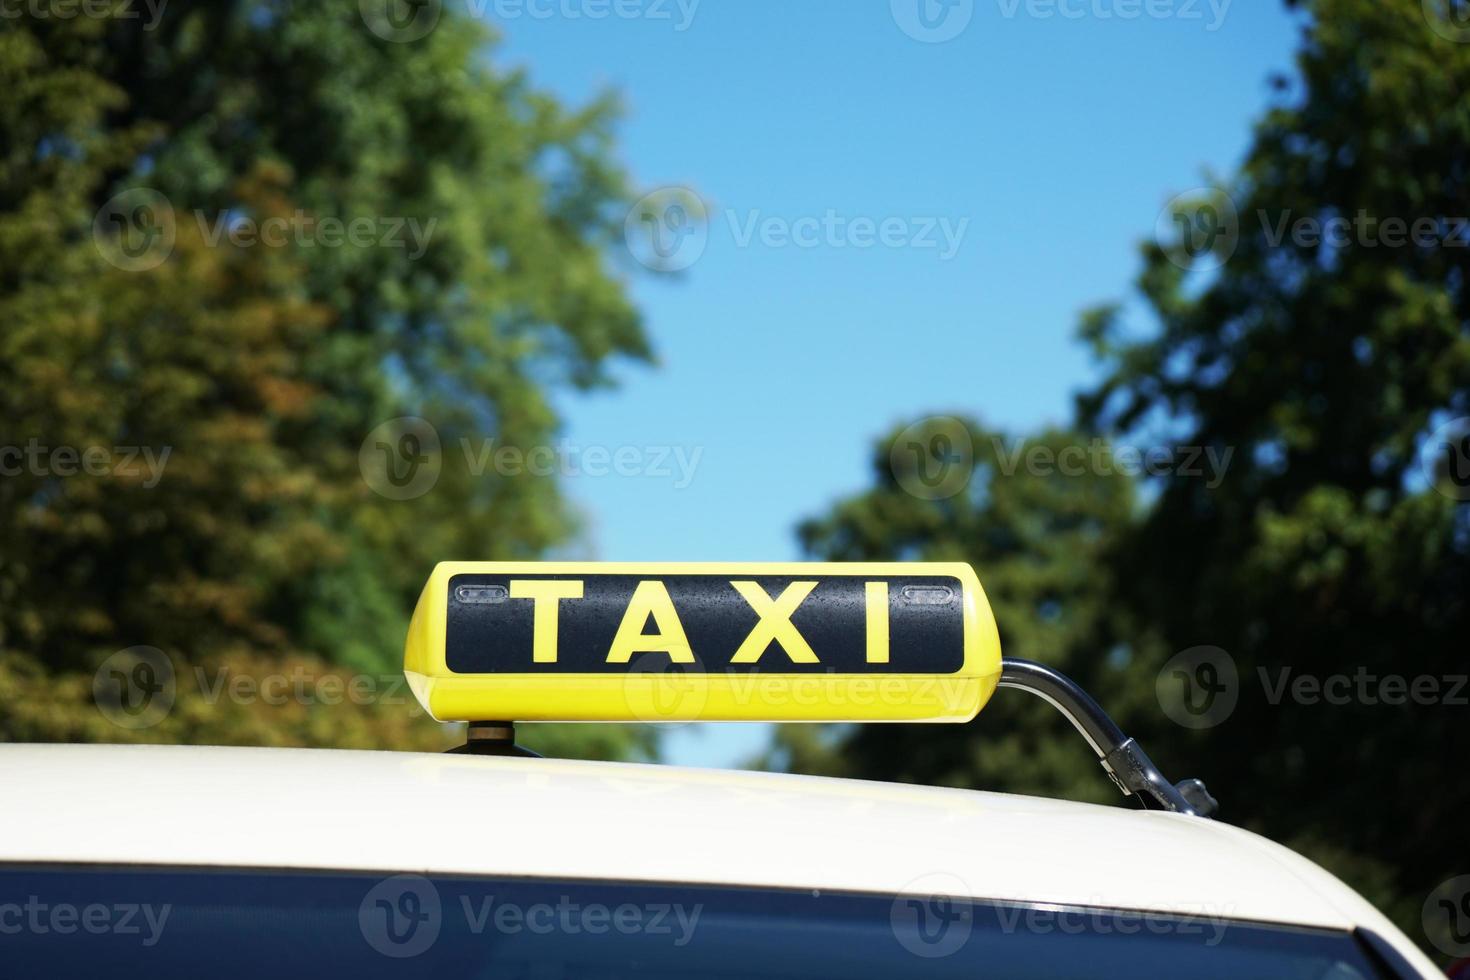 german taxi sign on car roof photo